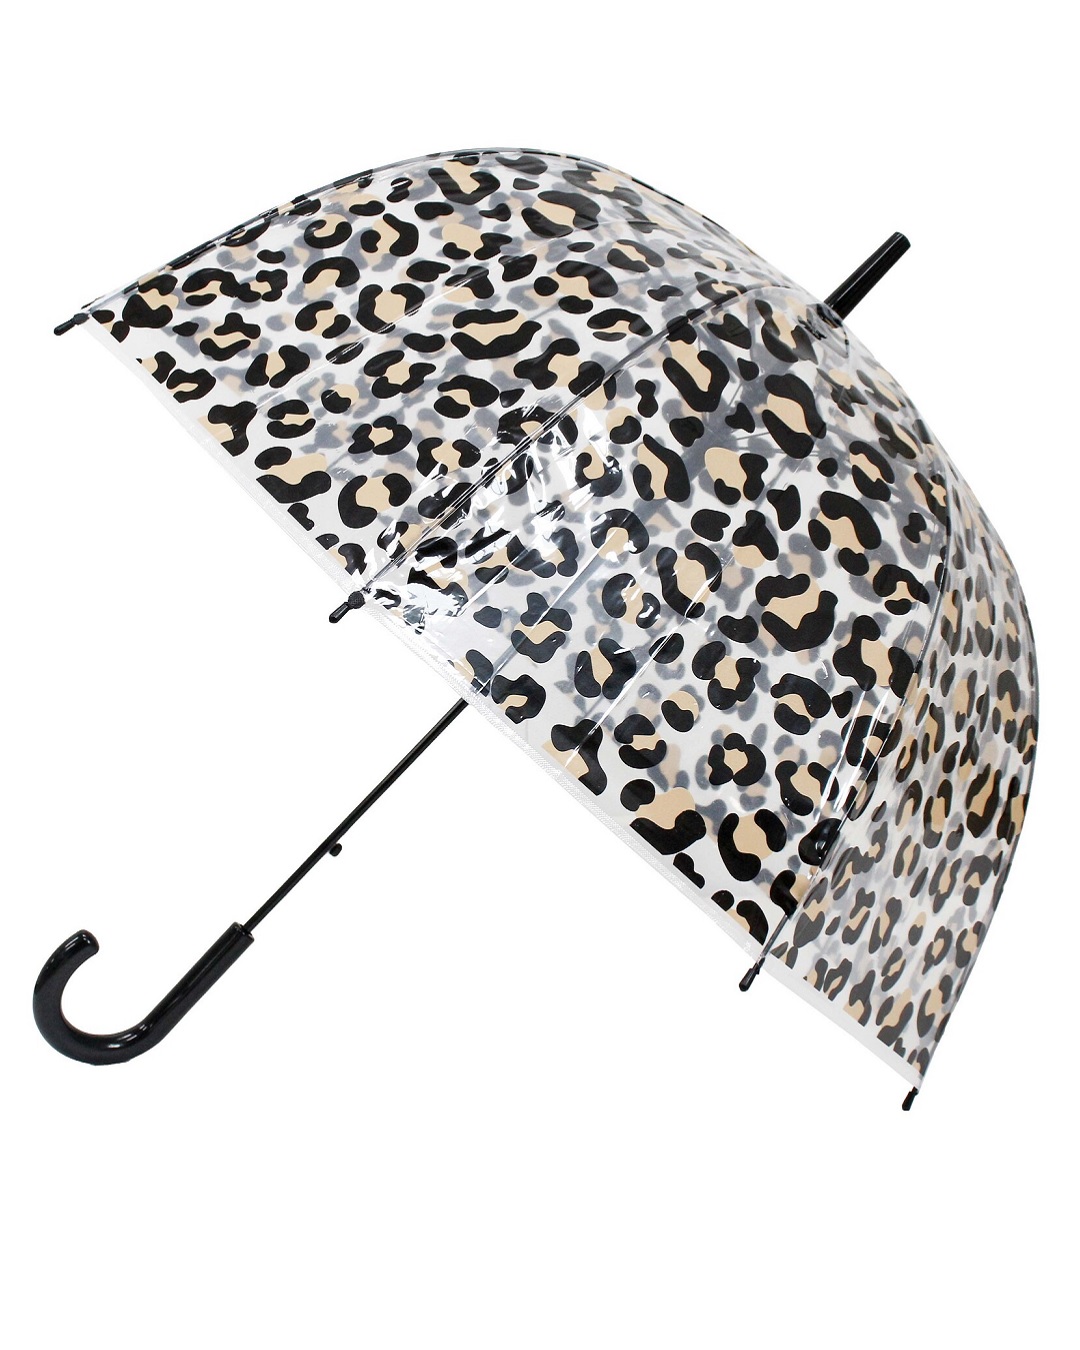 Clear umbrella with leopard spots